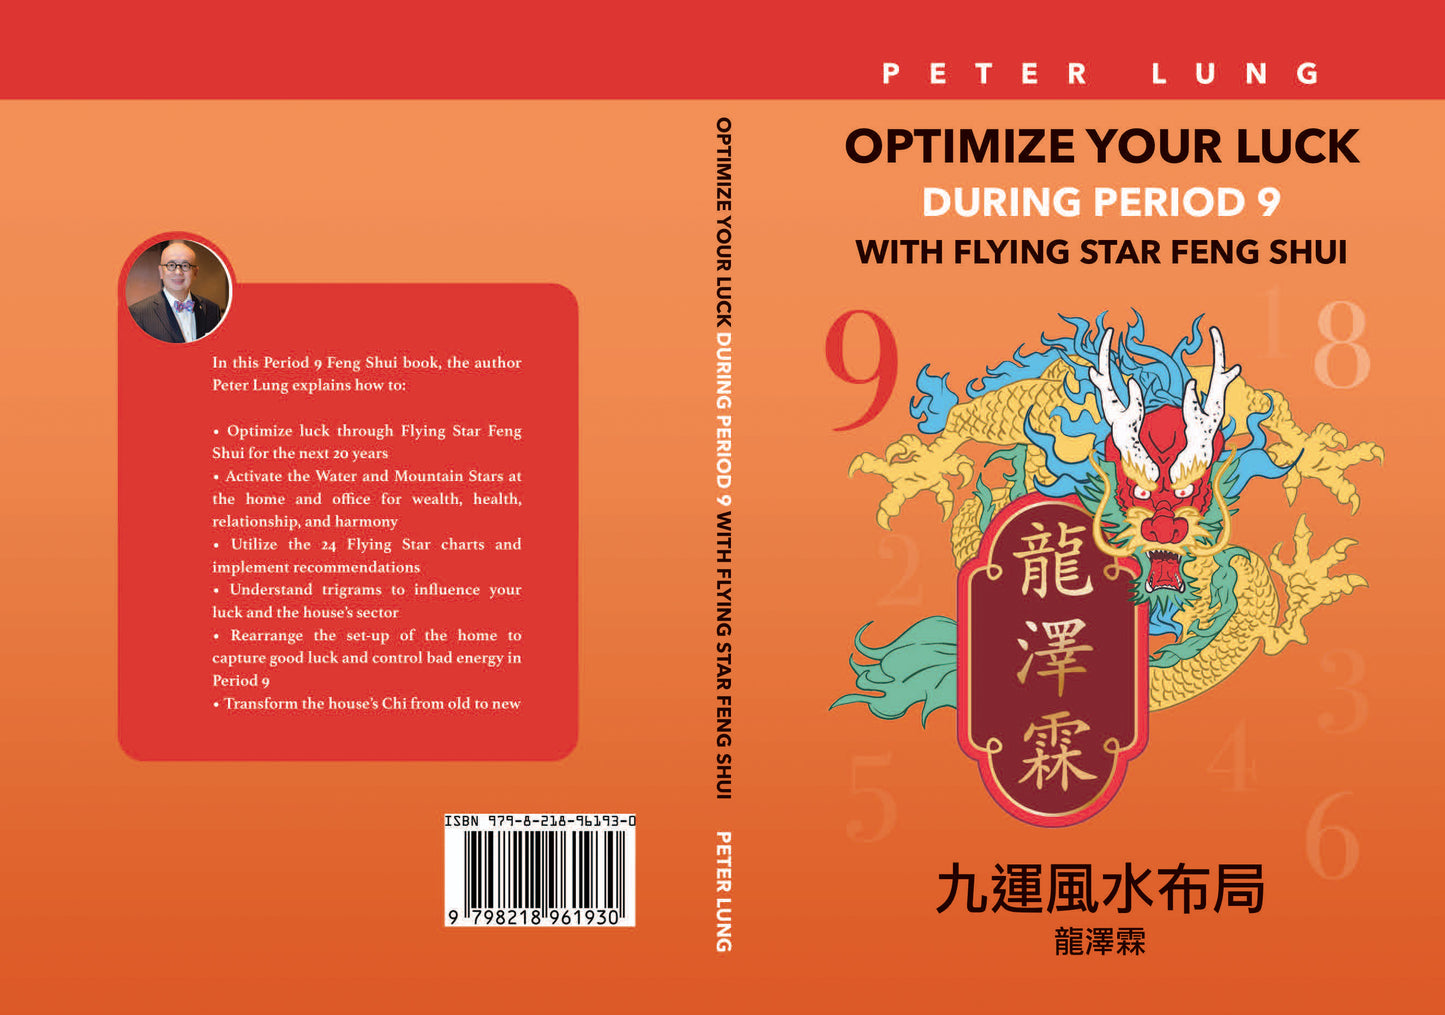 Optimize Your Luck During Period 9 - Flying Star Feng Shui By Peter Lung